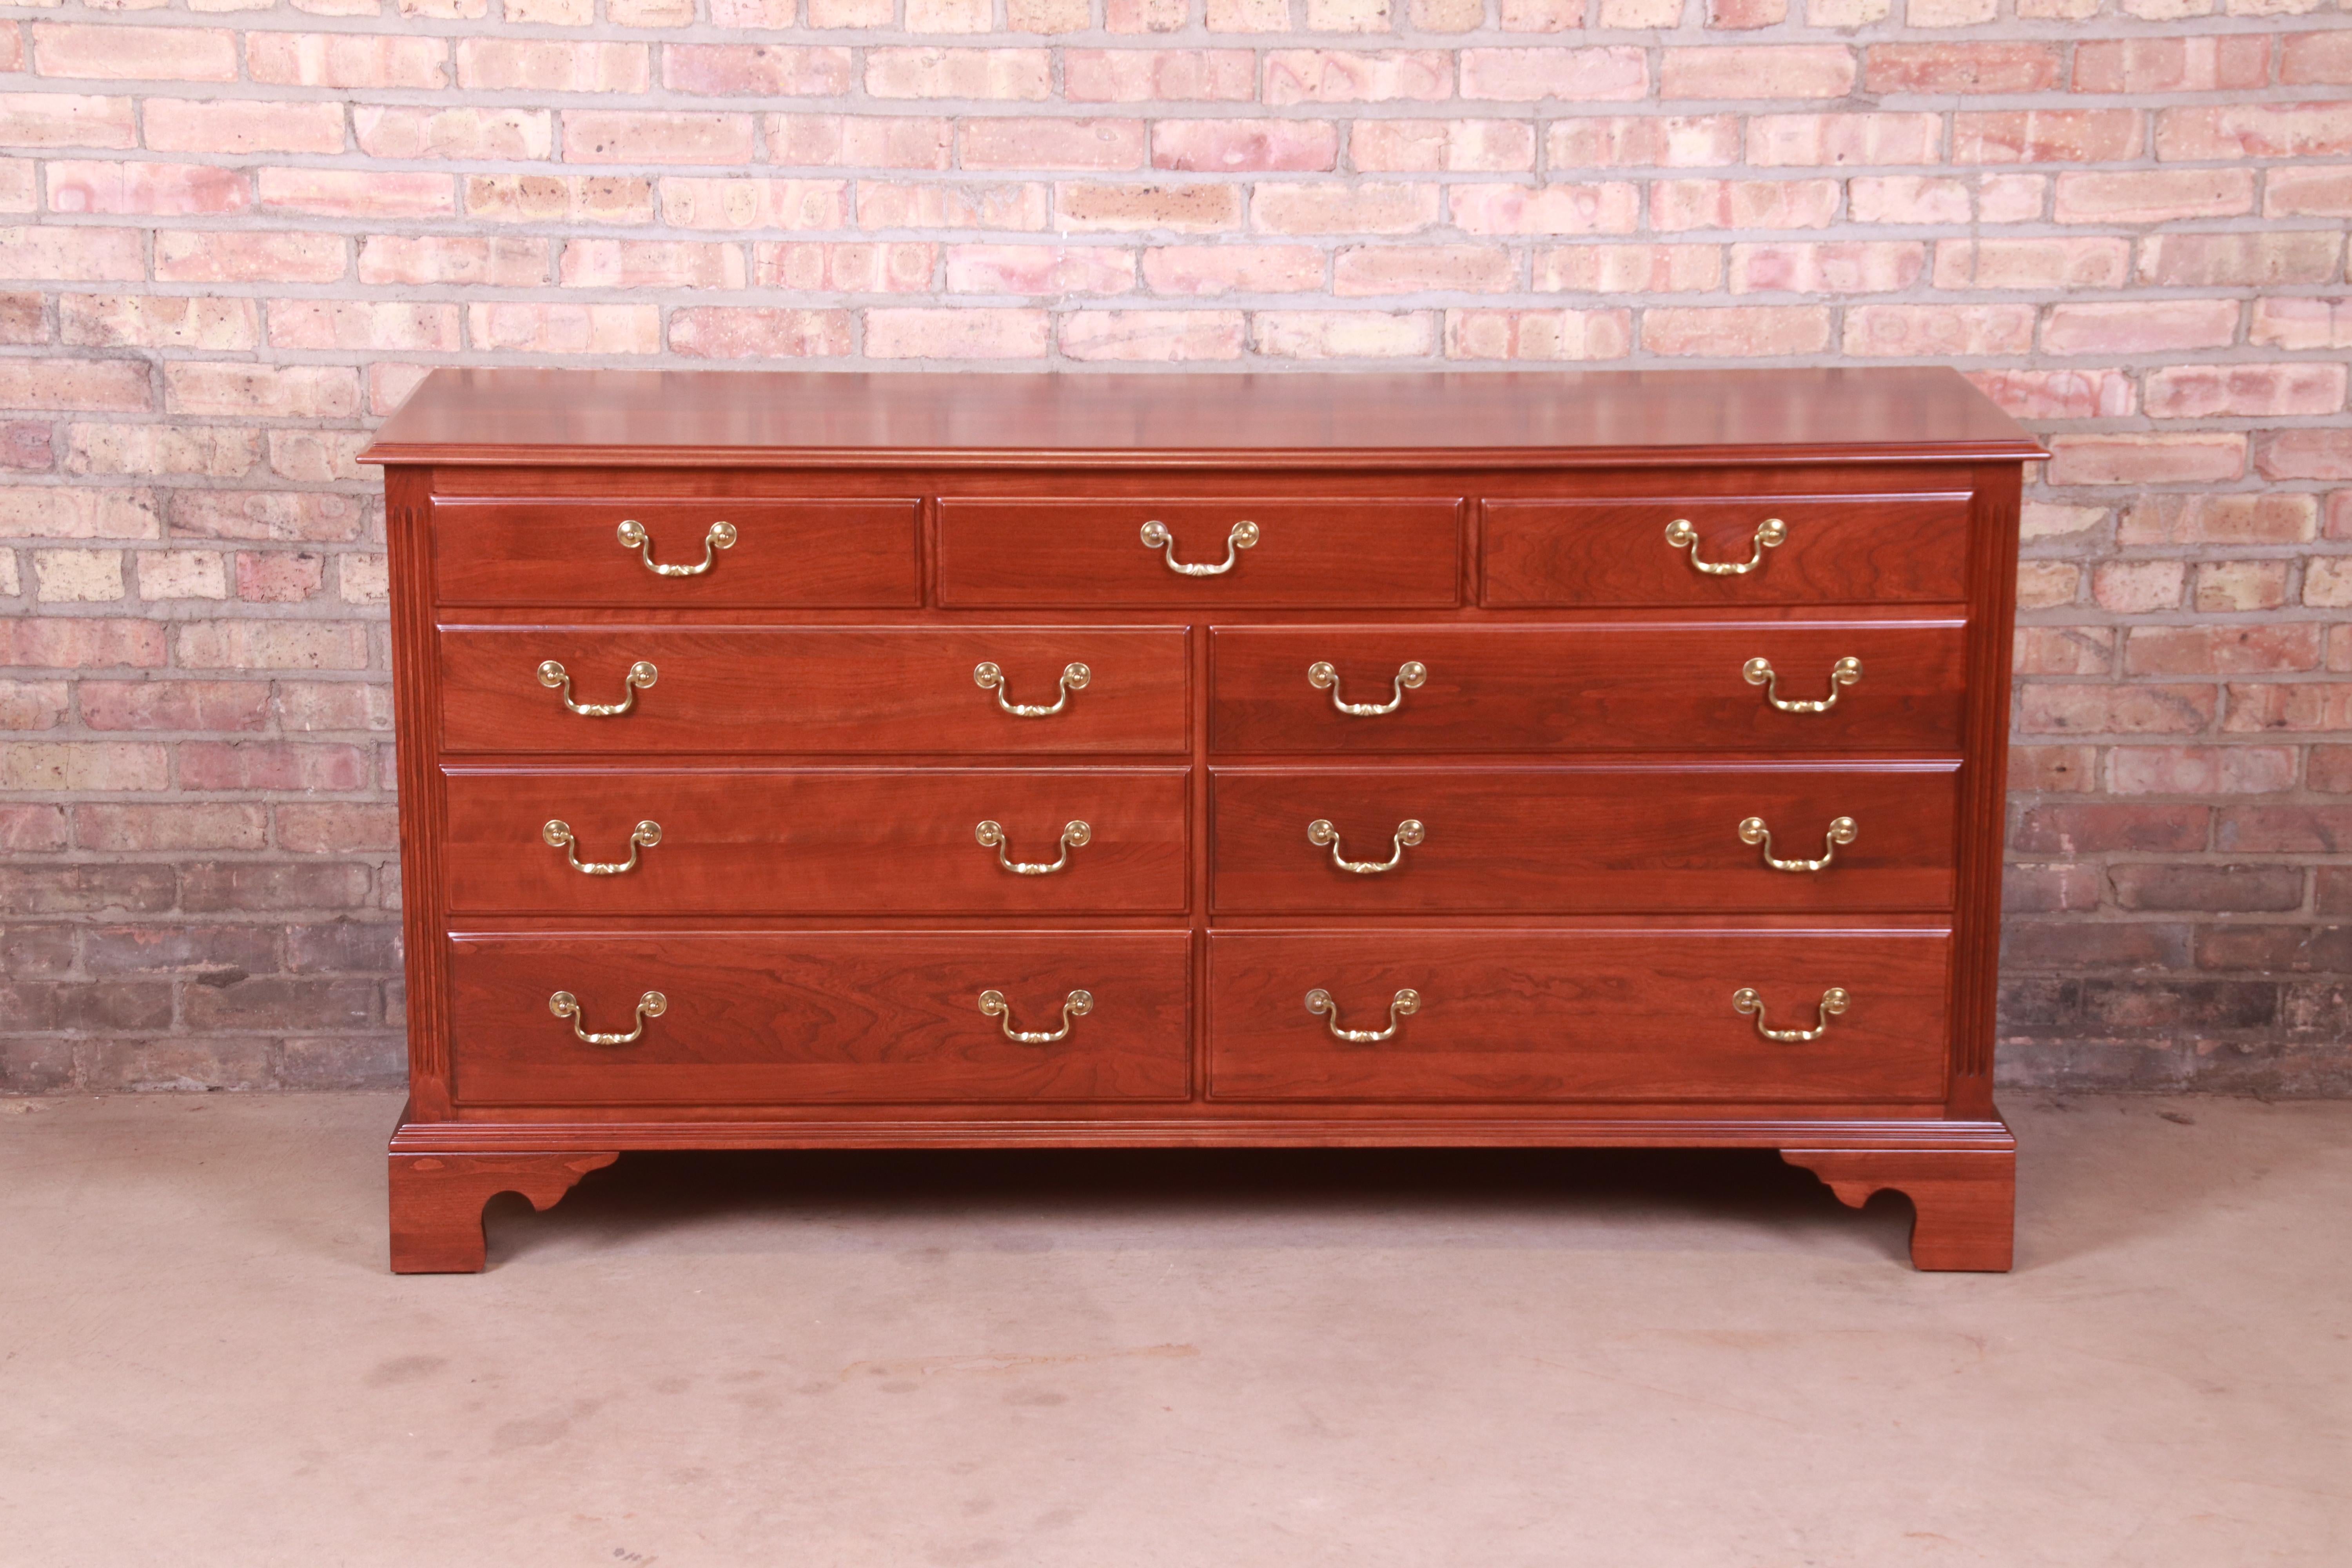 A gorgeous Georgian or Chippendale style seven-drawer dresser or credenza

USA, 1990s

Solid cherry wood, with original brass hardware.

Measures: 63.75